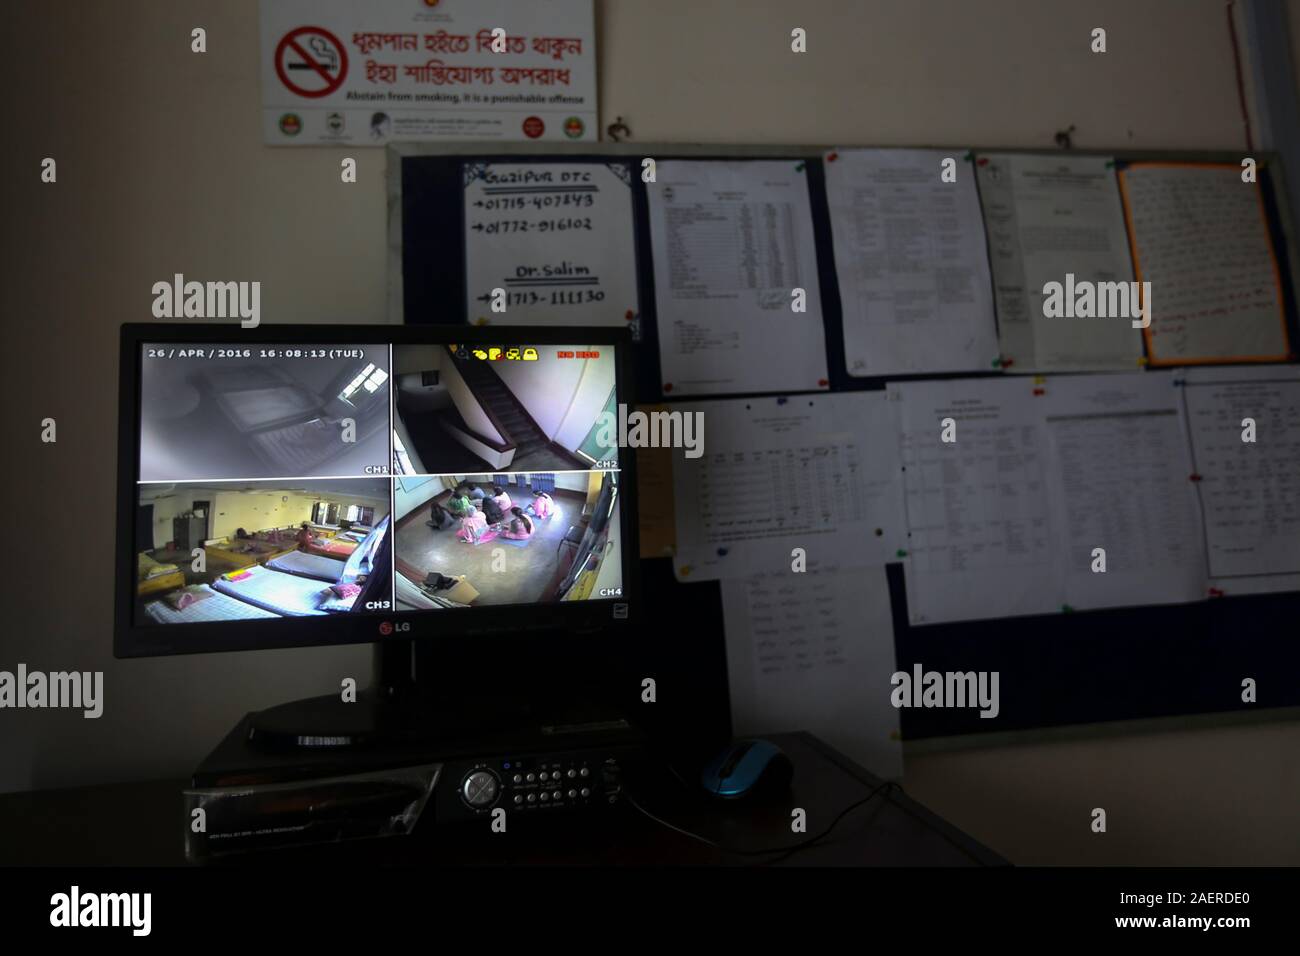 A drug-addicted rehab center in Dhaka keeping its patients under constant surveillance. Dhaka, Bangladesh Stock Photo